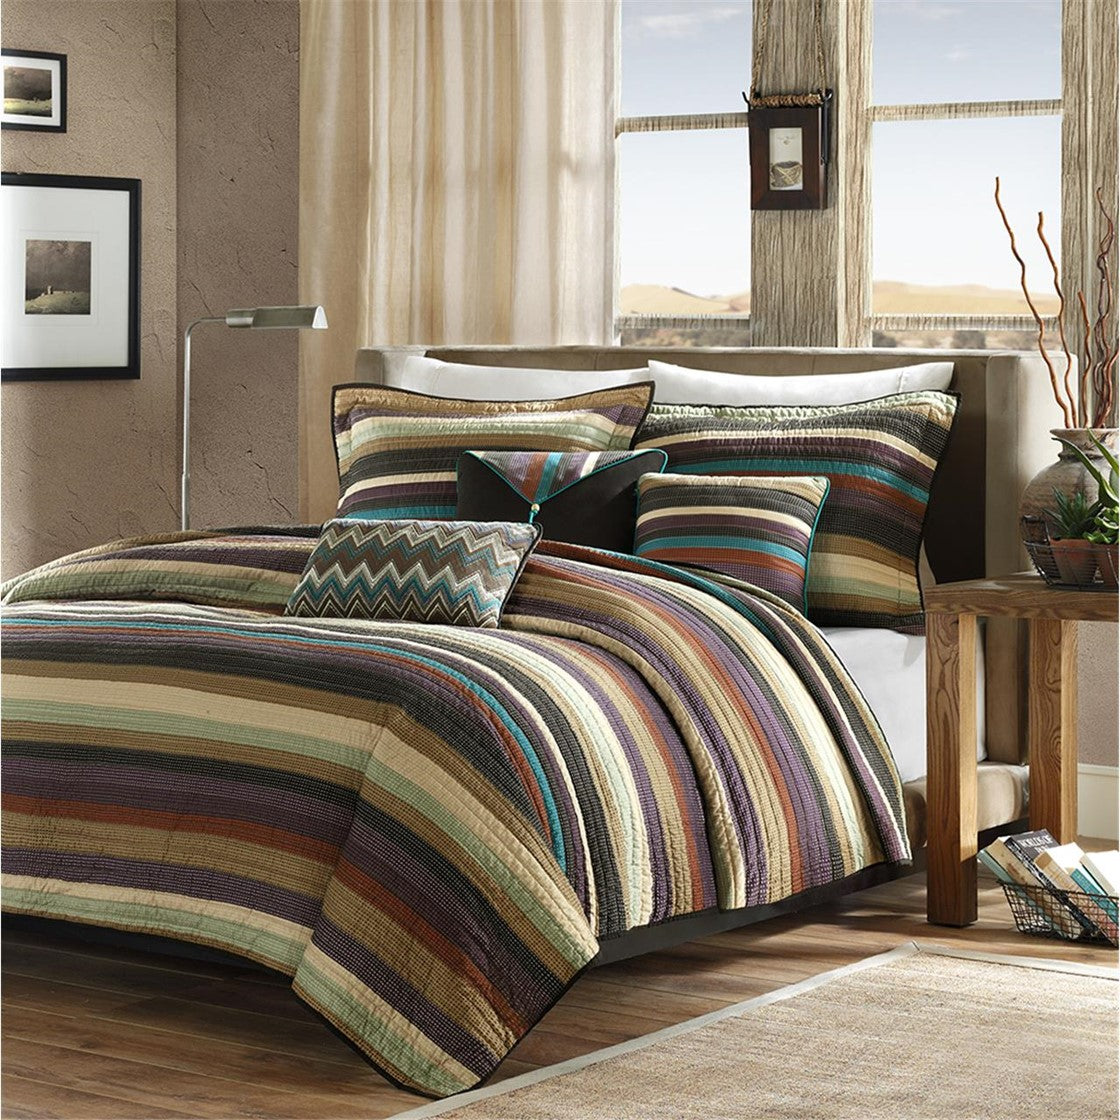 Madison Park Yosemite Reversible Quilt Set with Throw Pillows - Multicolor - Full Size / Queen Size